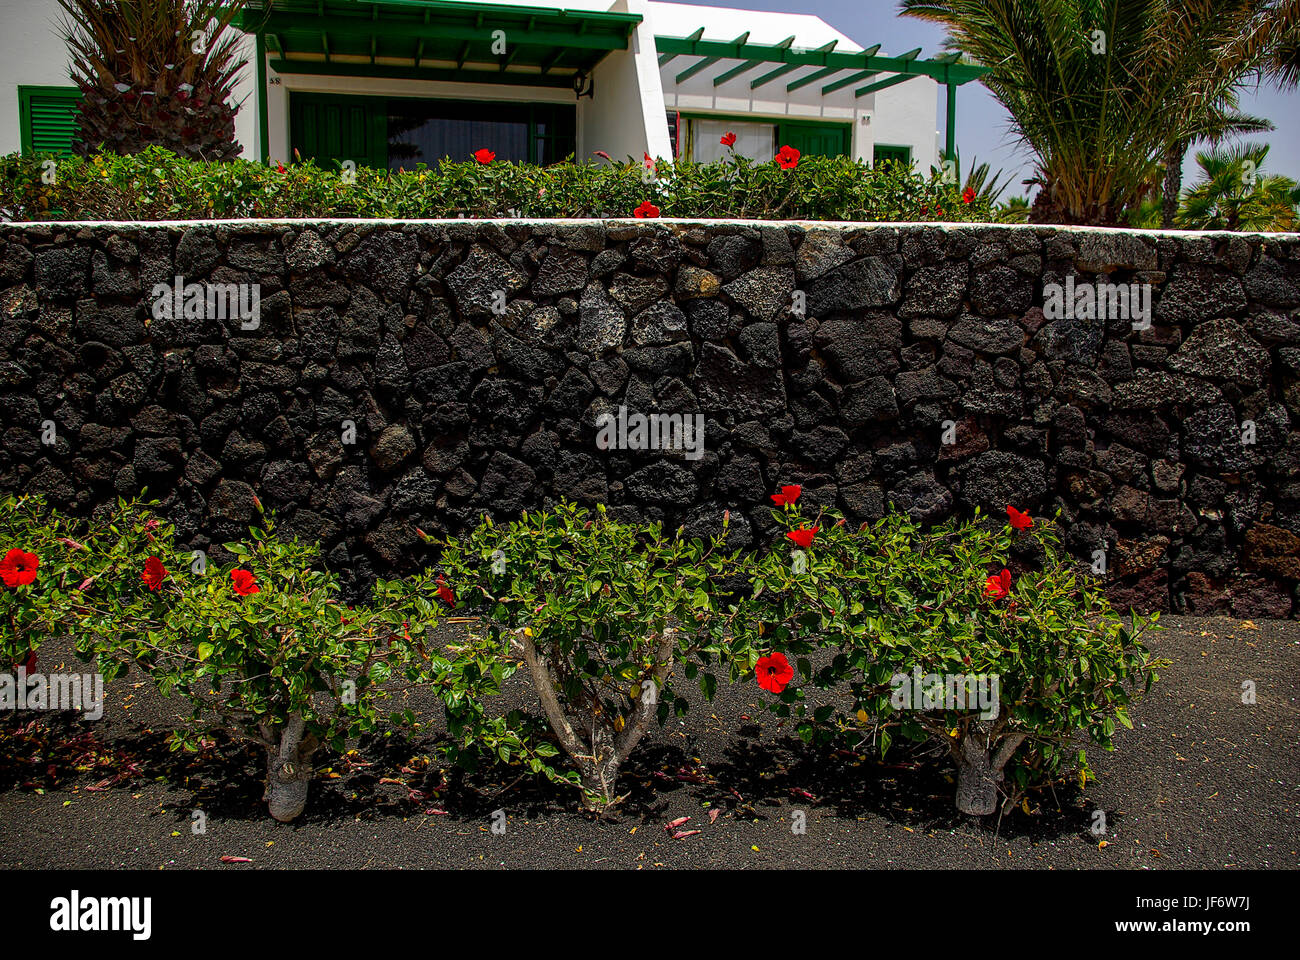 Lanzarotic residential architecture with walling and front yard, Canary Islands, Spain. Stock Photo